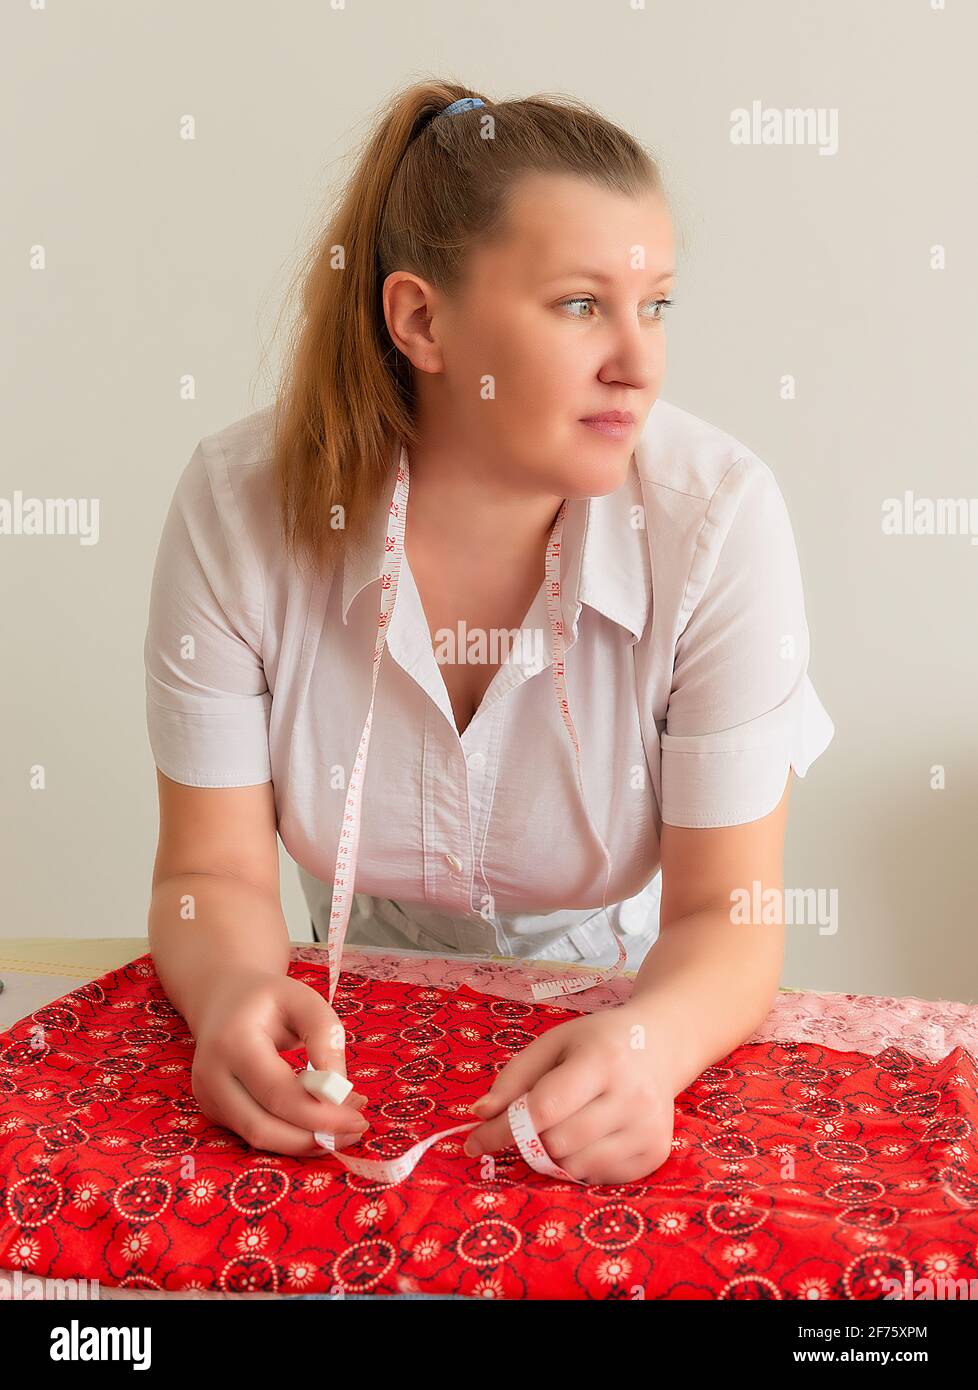 The woman is leaning over the table on which the cloth is lying, with a thoughtful look, holding a crayon and a tailor's meter Stock Photo